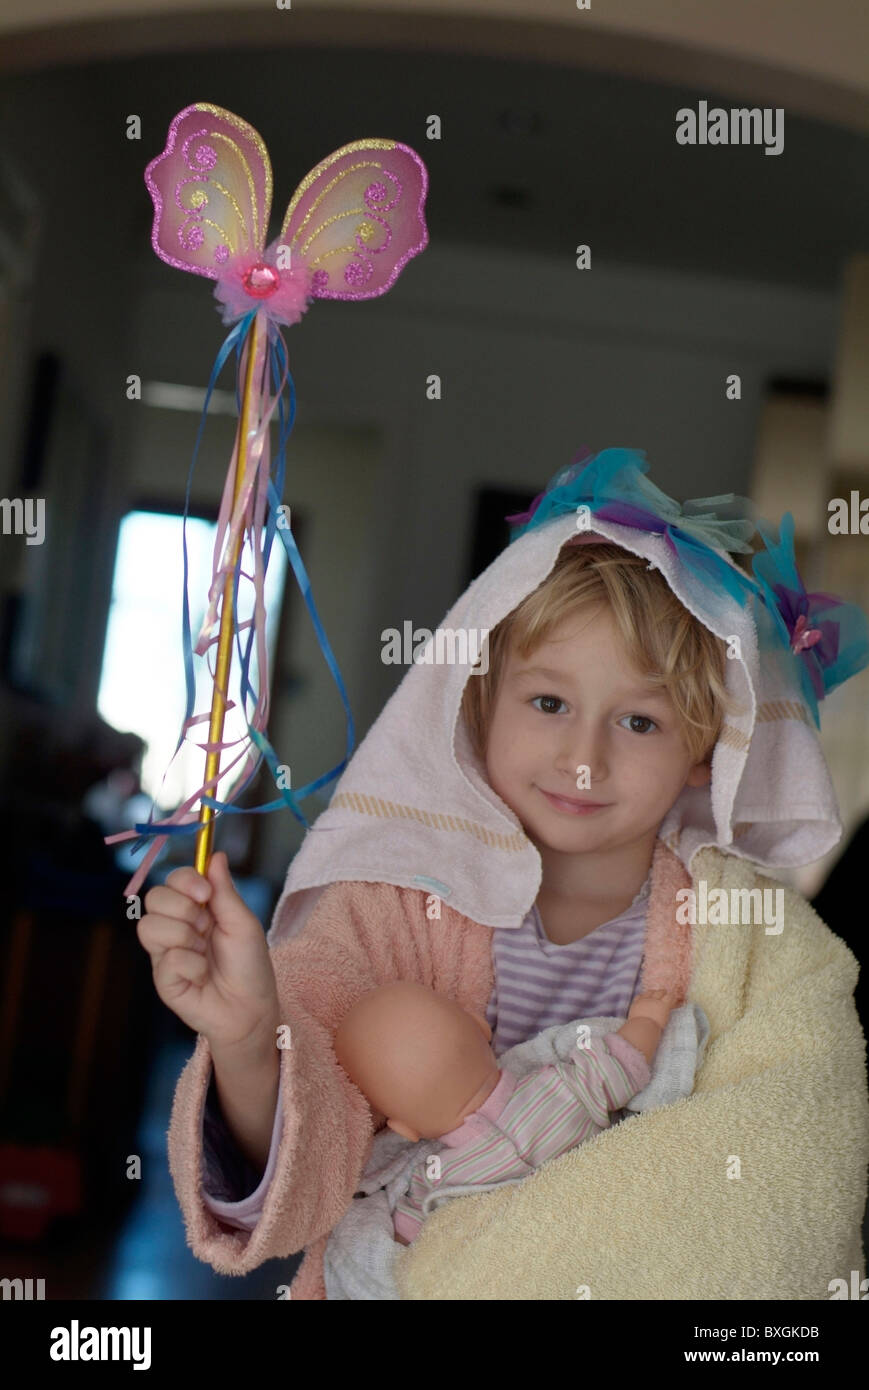 Little girl playing dress-up with a magic wand and baby doll. Stock Photo